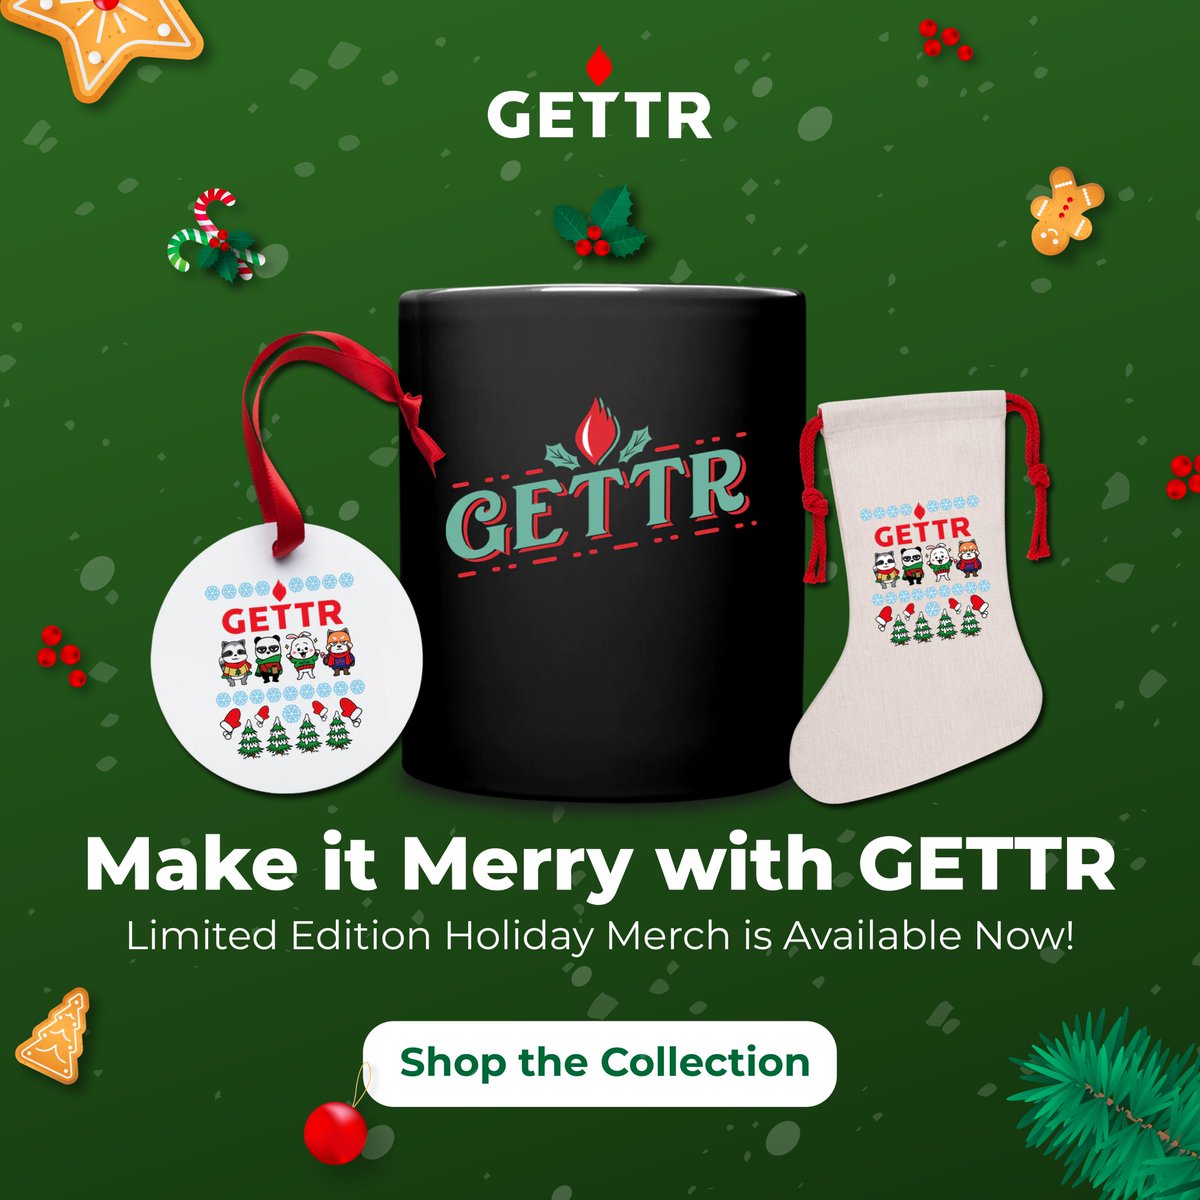 🎅'Tis the season for GETTR gear! 🎅 Our holiday merch collection has arrived - ugly sweaters, comfy hoodies, coffee mugs & more! This special collection is only available for a limited time, so shop these holly jolly hits while you can!🎄 Shop now: store.gettr.com/collections/ge…